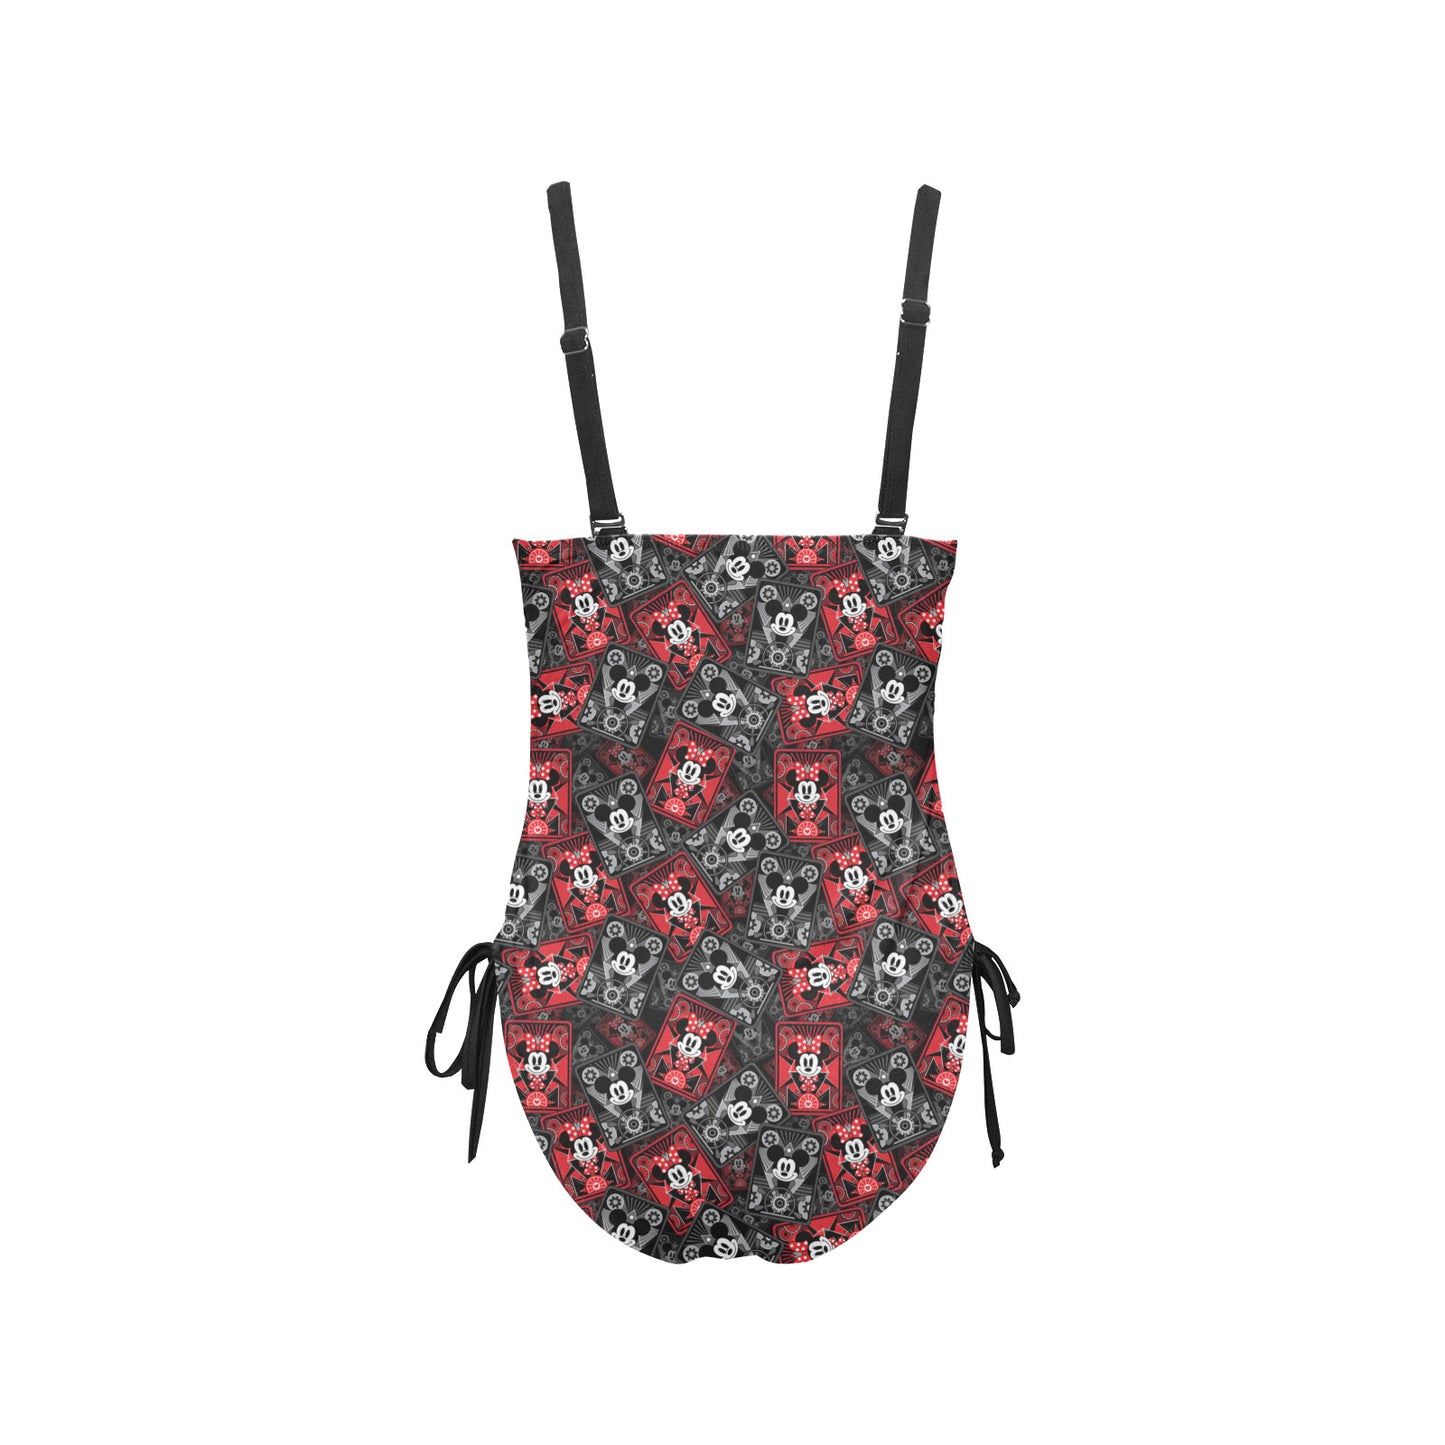 Steamboat Mickey And Minnie Cards Drawstring Side Women's One-Piece Swimsuit